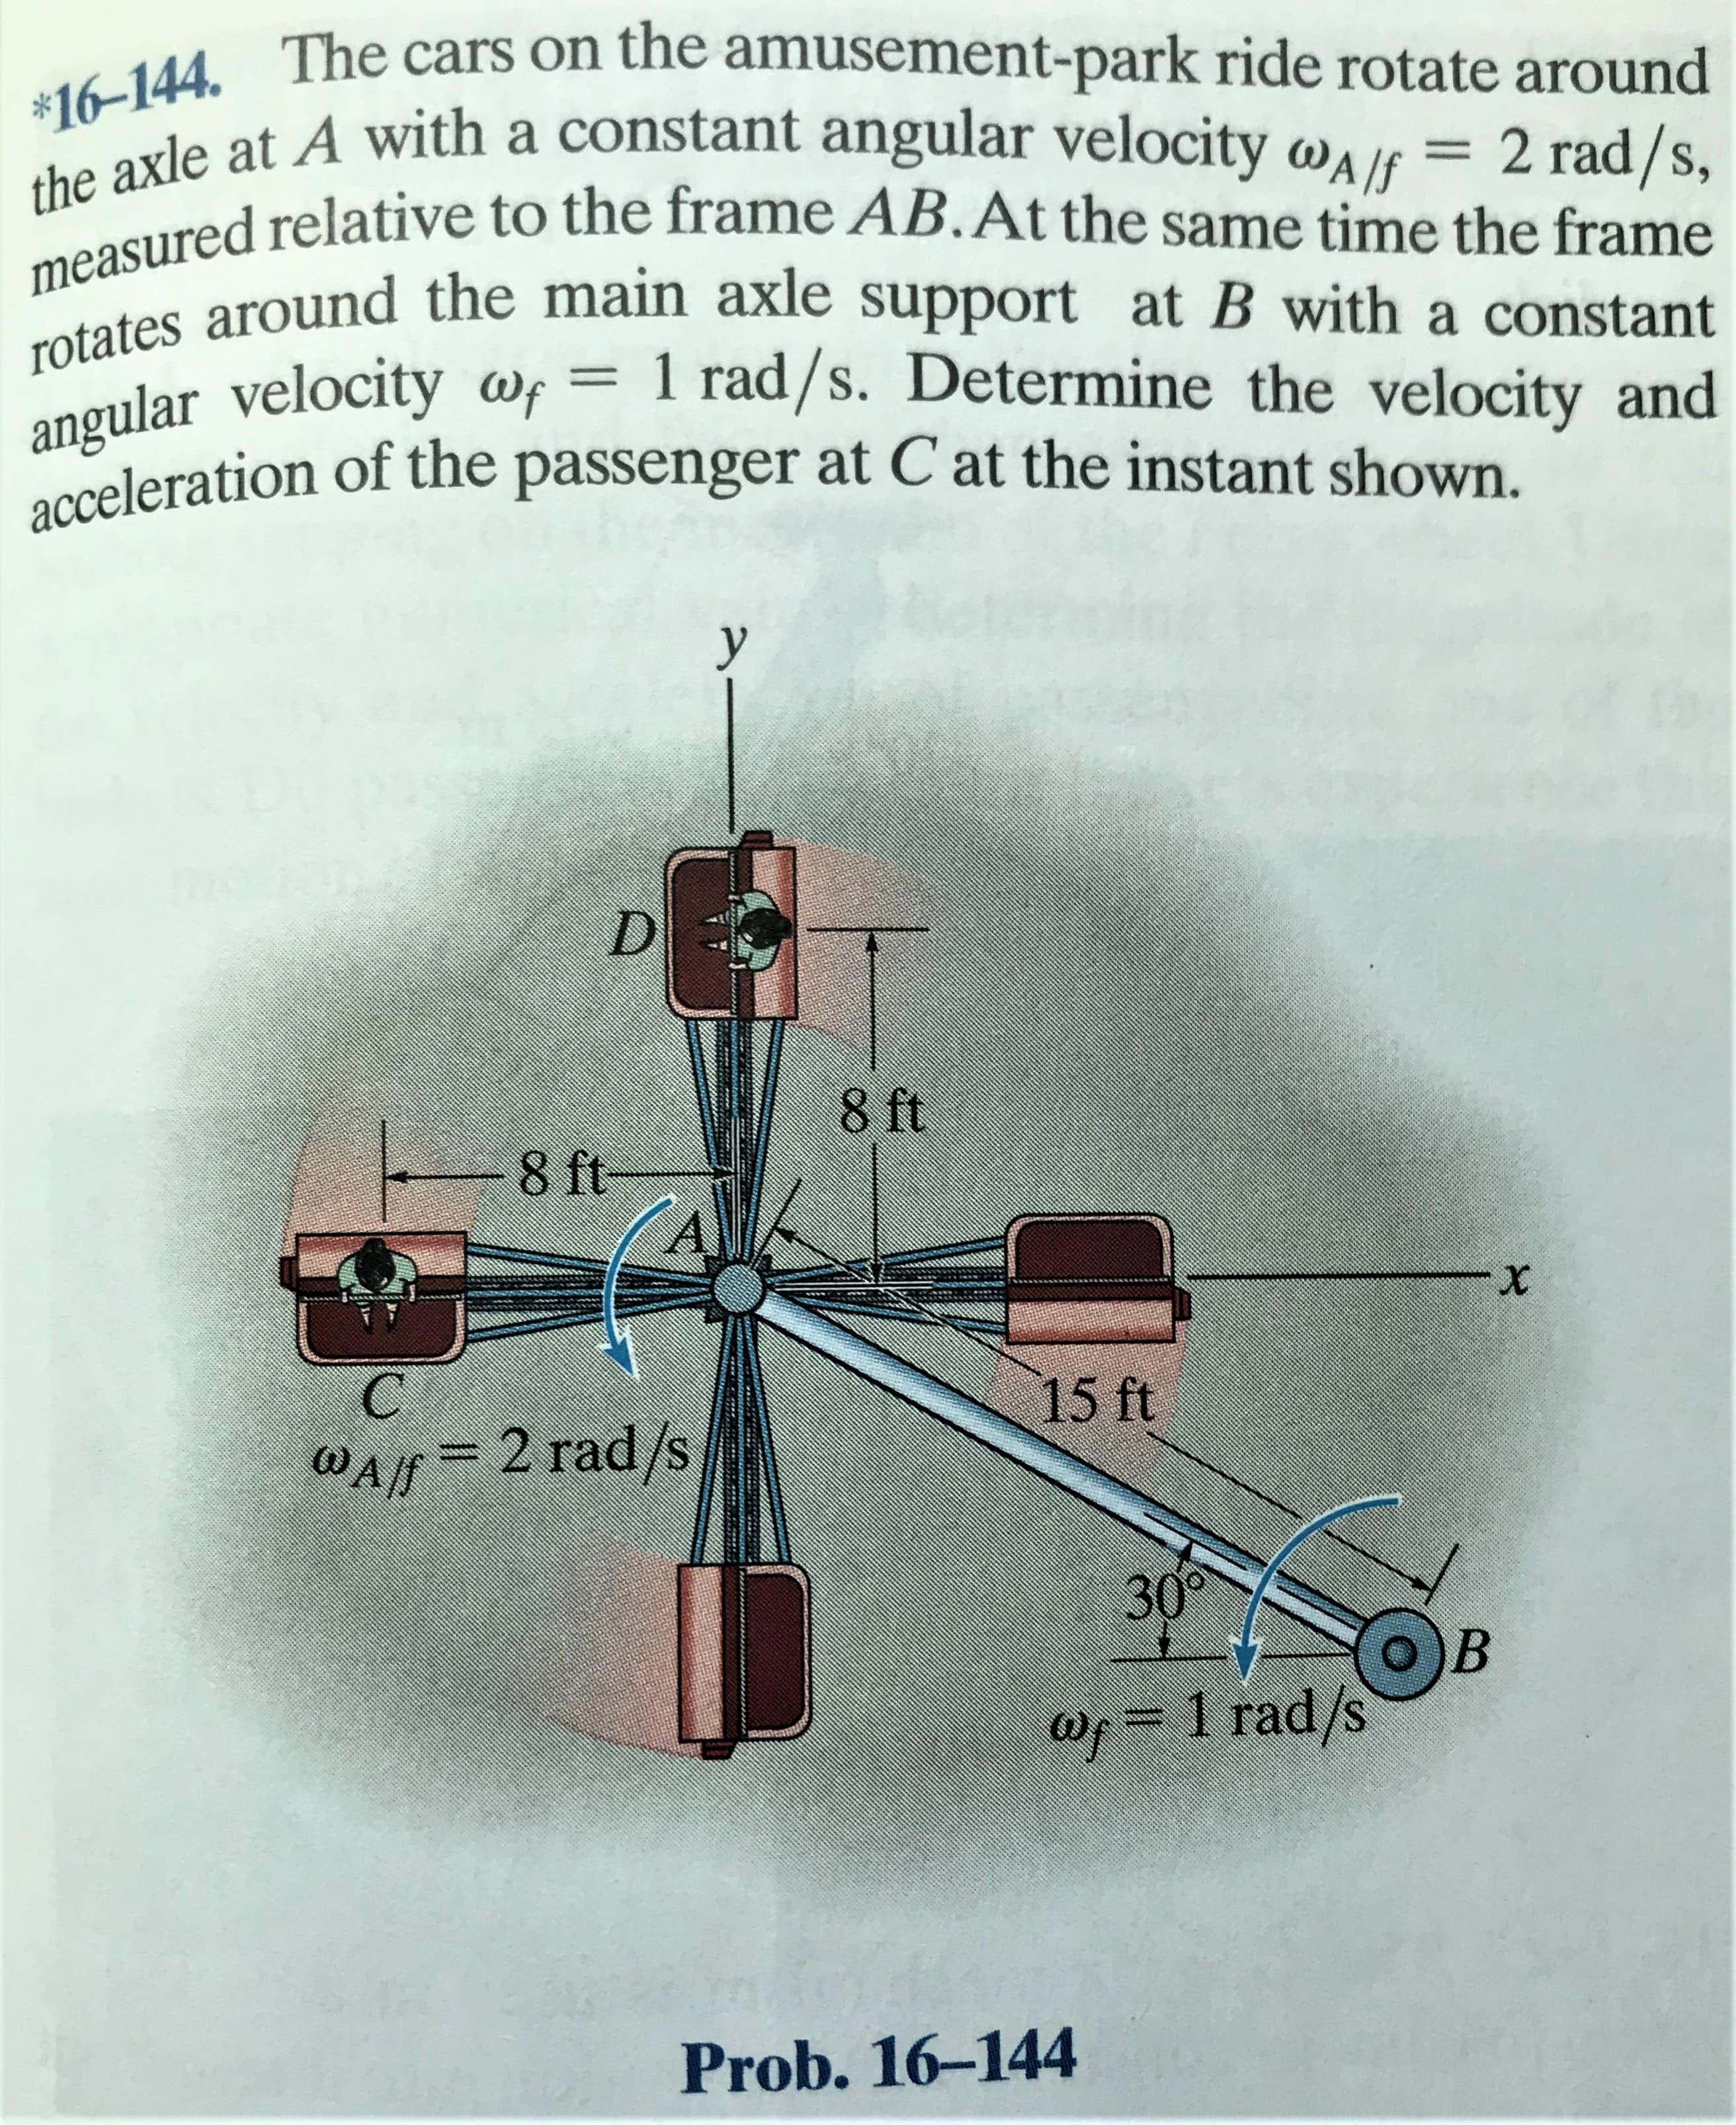 *16-144. The cars on the amusement-park ride rotate around
the axle at A with a constant angular velocity walf = 2 rad/s,
measured relative to the frame AB.At the same time the frame
rotates around the main axle support at B with a constant
angular velocity wf = 1 rad/s. Determine the velocity and
acceleration of the passenger at C at the instant shown.
D.
8 ft
8 ft
A.
C
15 ft
WAlf= 2 rad/s
30°
о) в
Wp=D1 rad/s
Prob. 16-144
